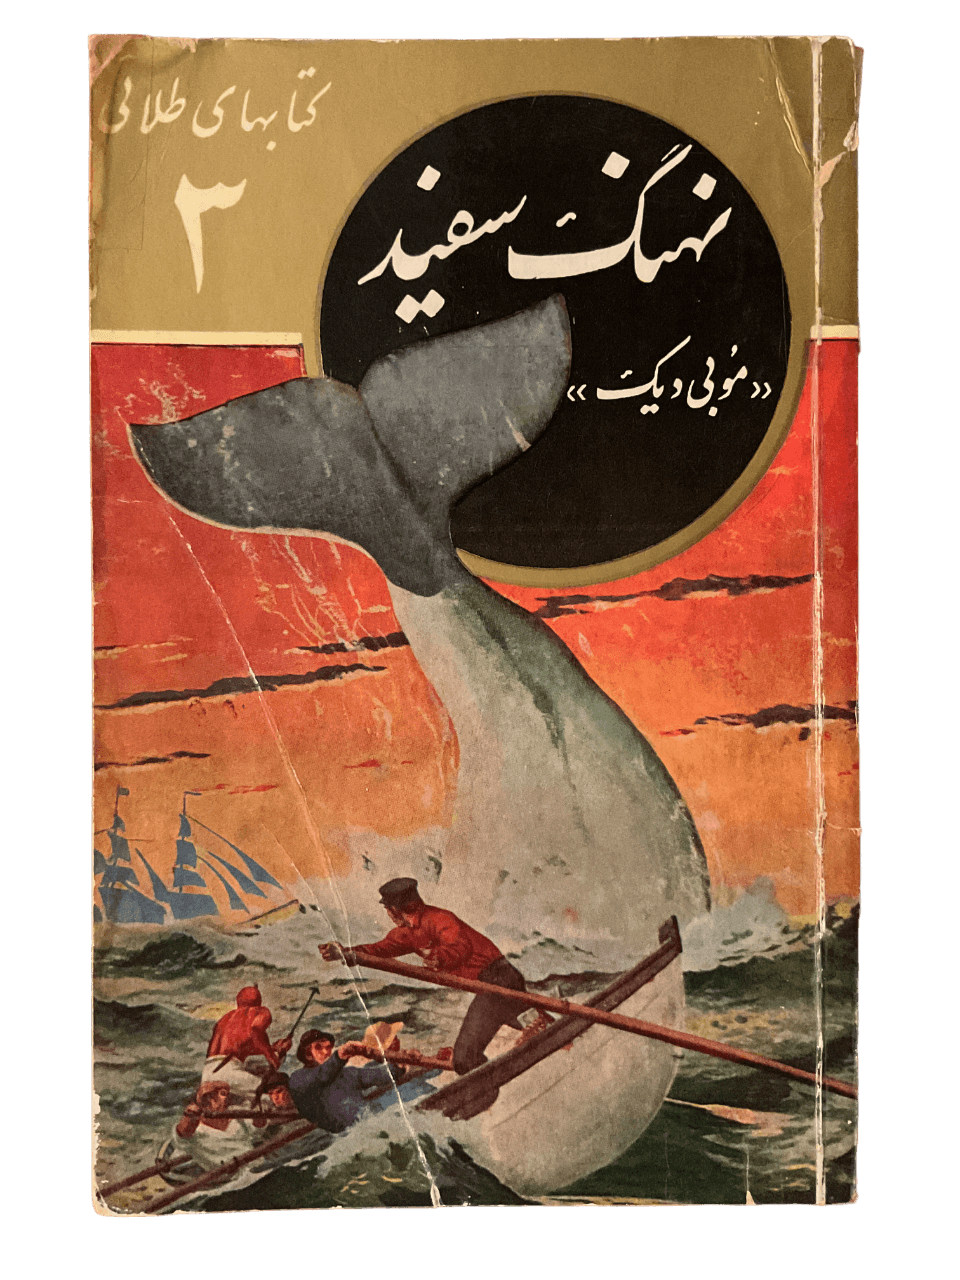 Moby Dick "The White Whale" (Farsi)